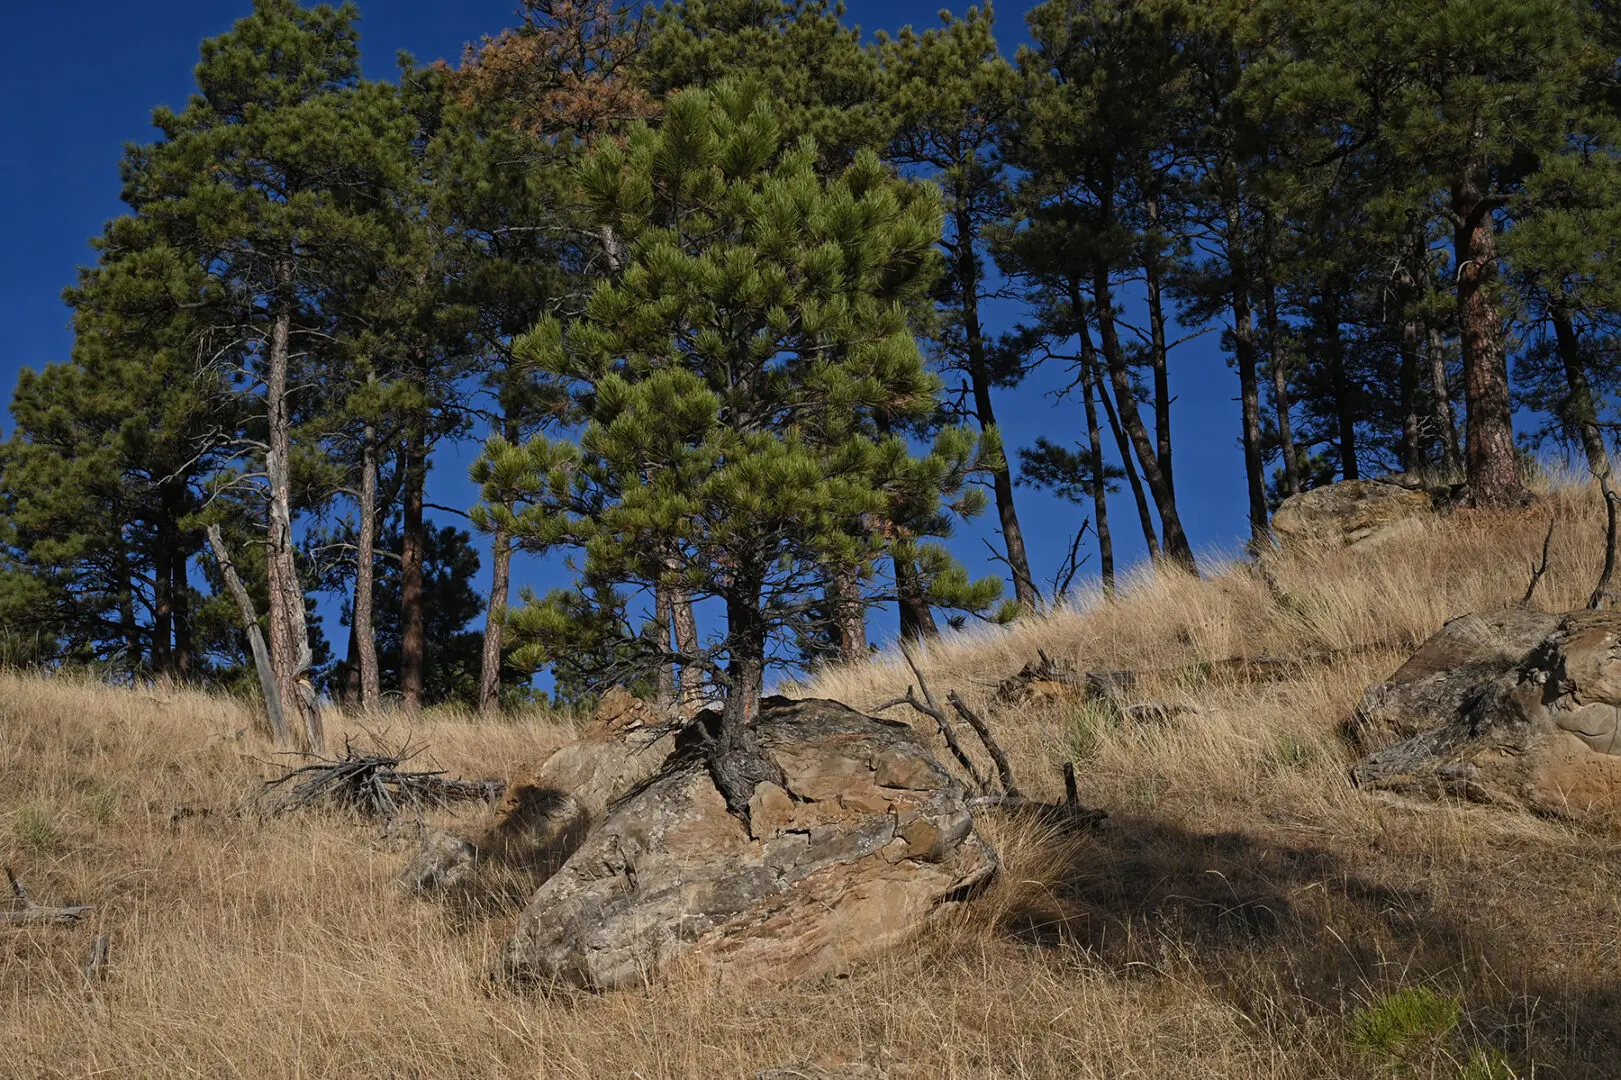 A tree is standing on the side of a hill